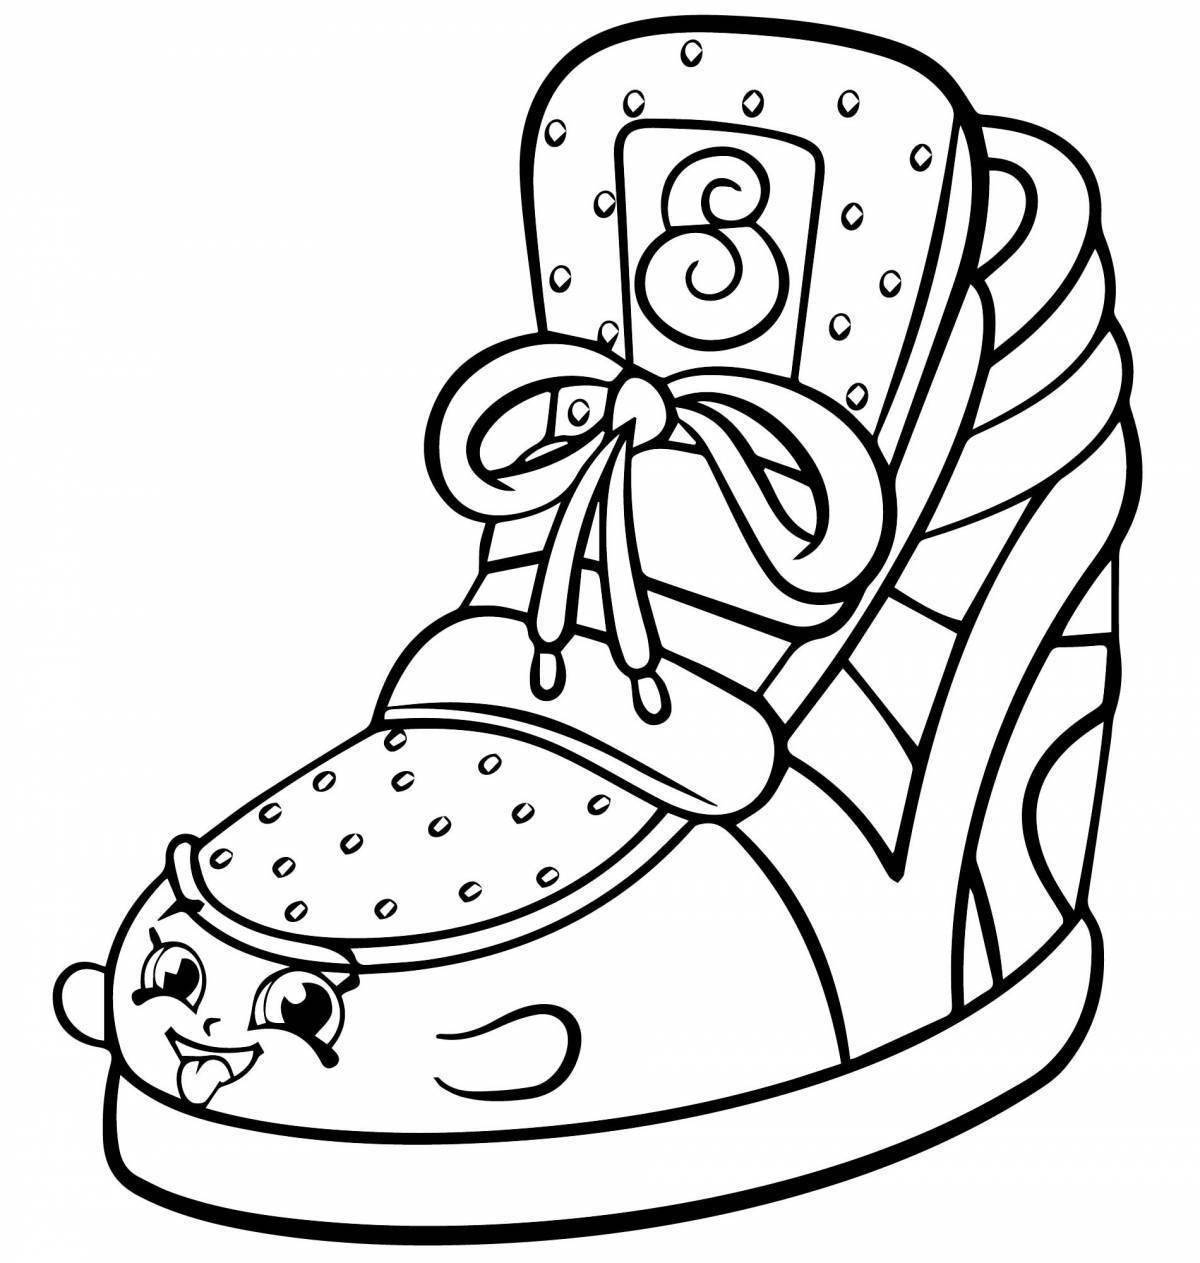 Coloring page beautiful shoes for children 5-6 years old